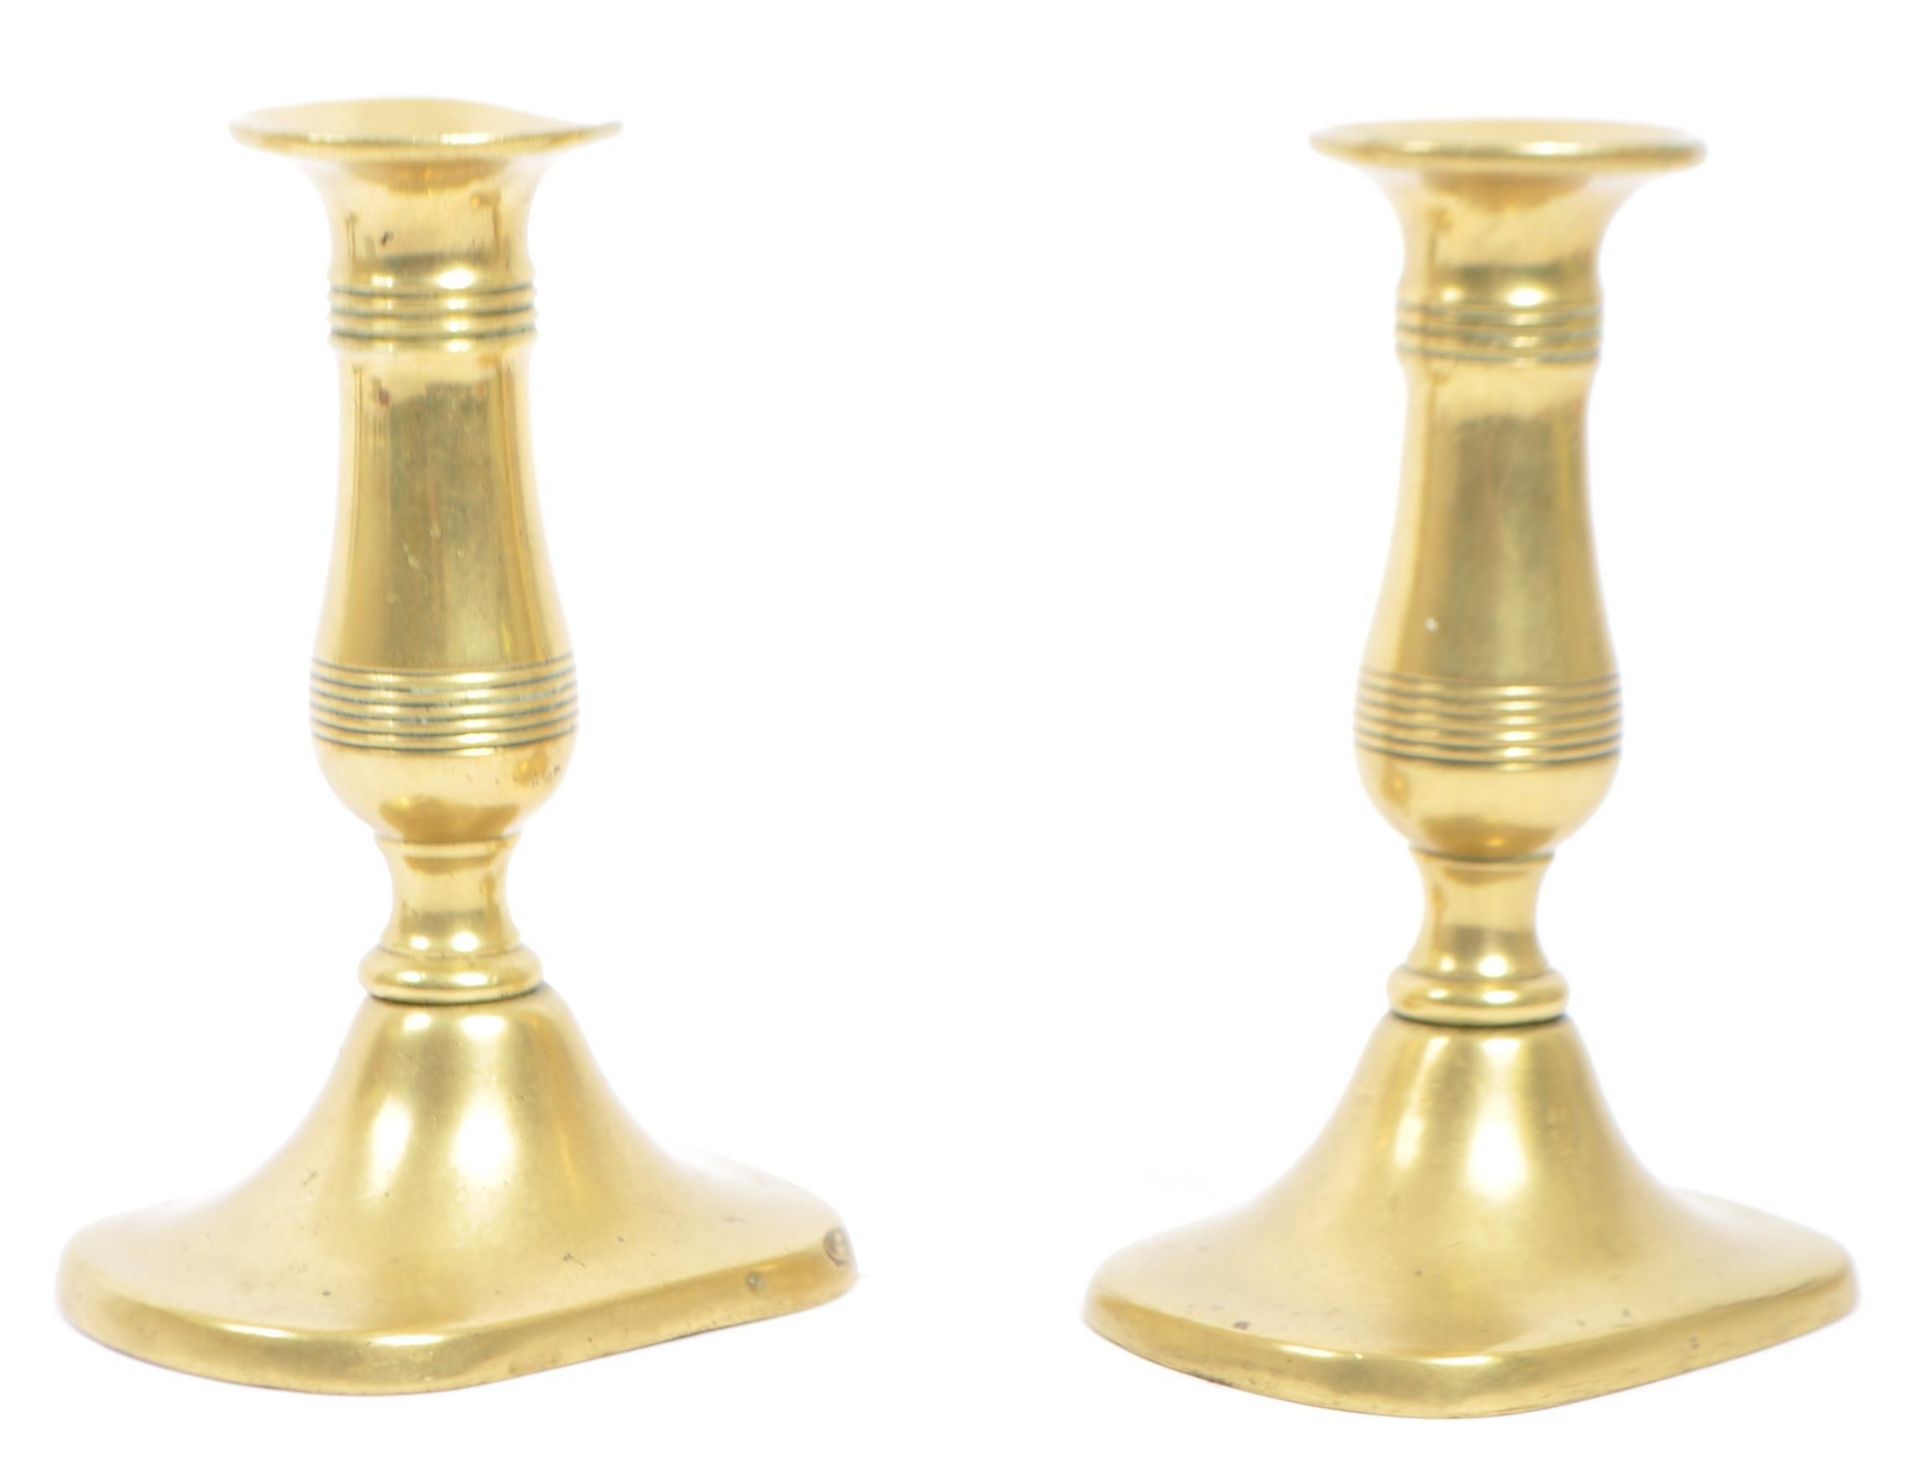 PAIR OF VINTAGE 20TH CENTURY CAMPAIGN BRASS CANDLE STICKS - Image 3 of 6